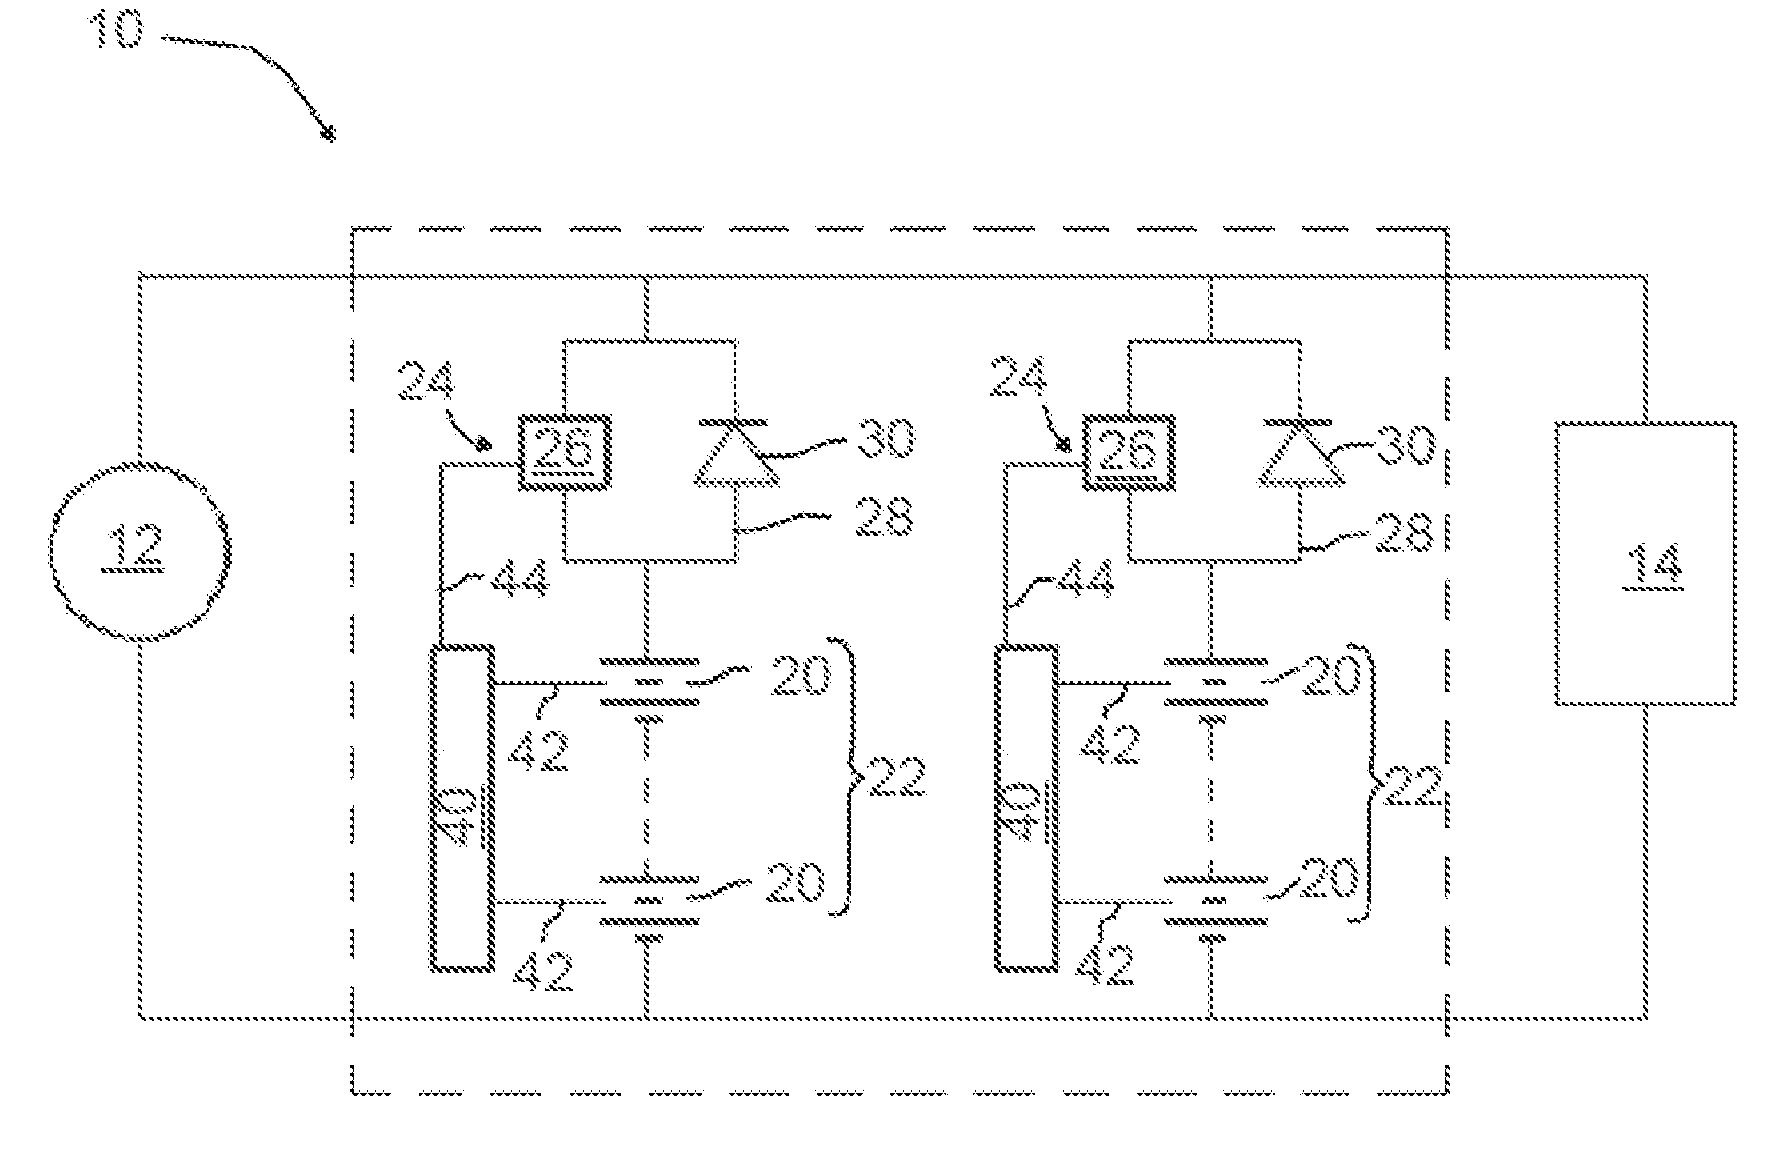 System and method for rechargeable battery